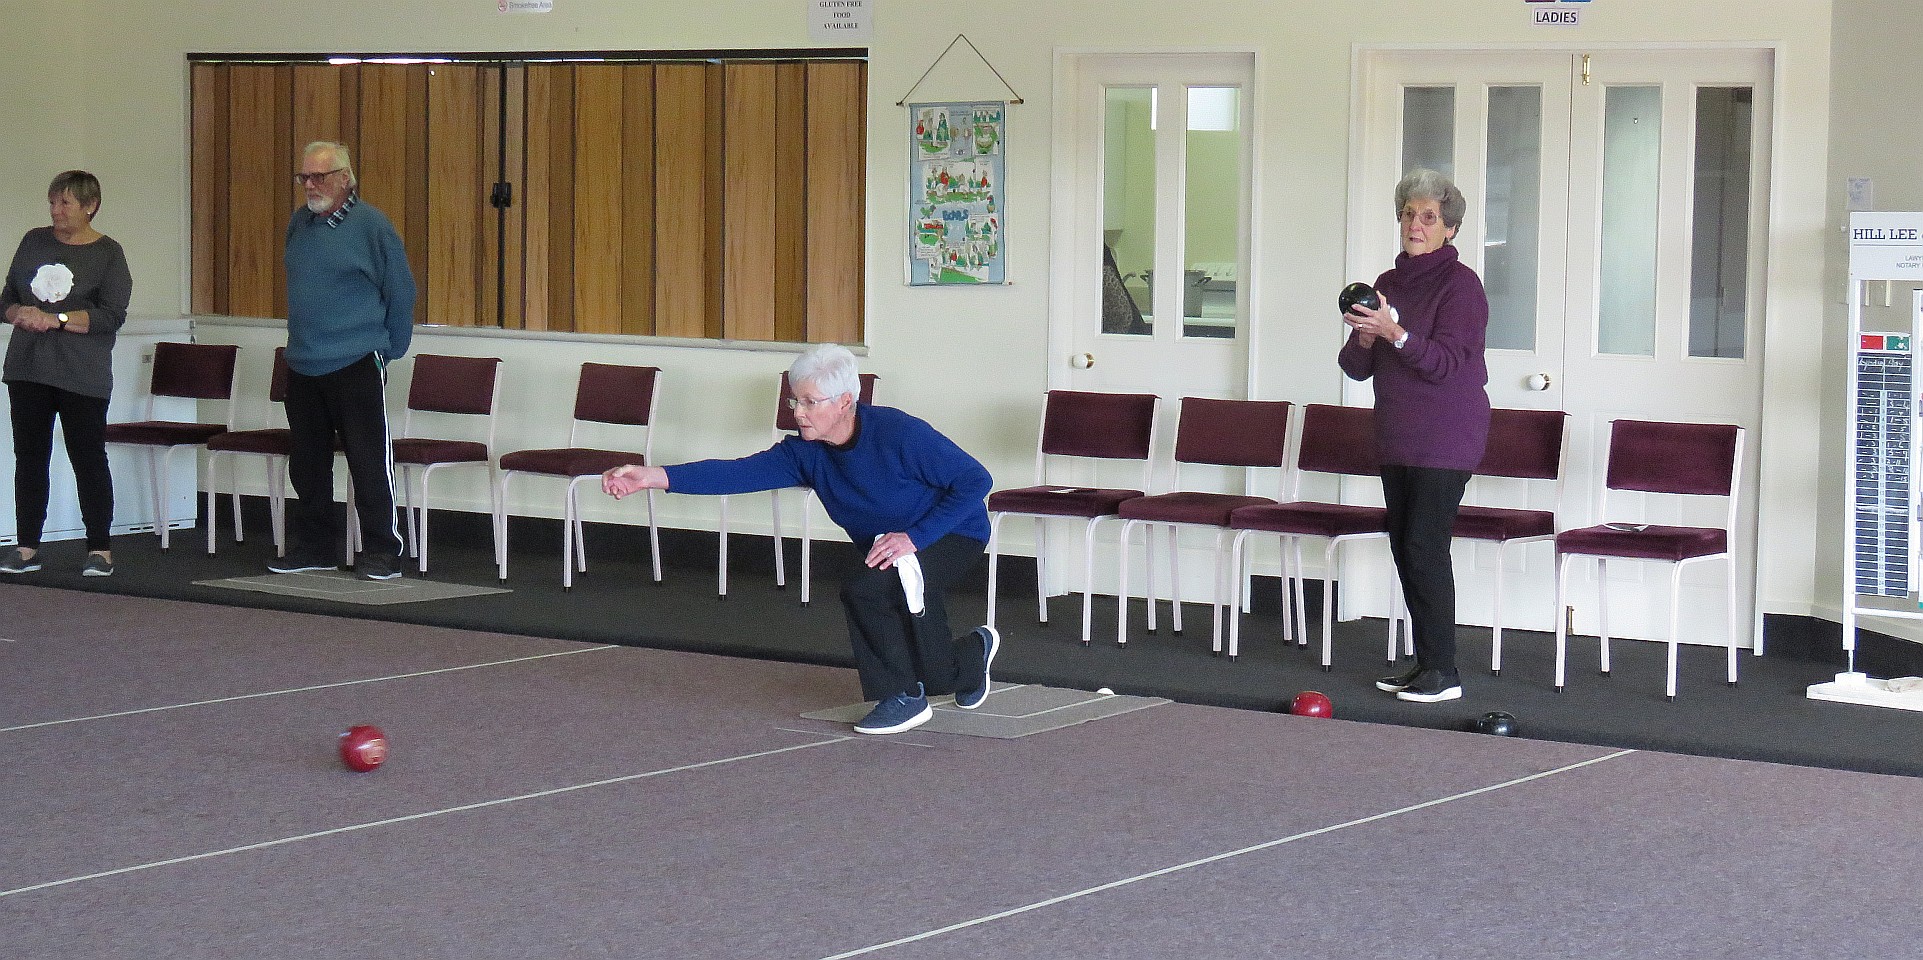 The Winter Indoor Bowls Grand Final on 12 August 2022